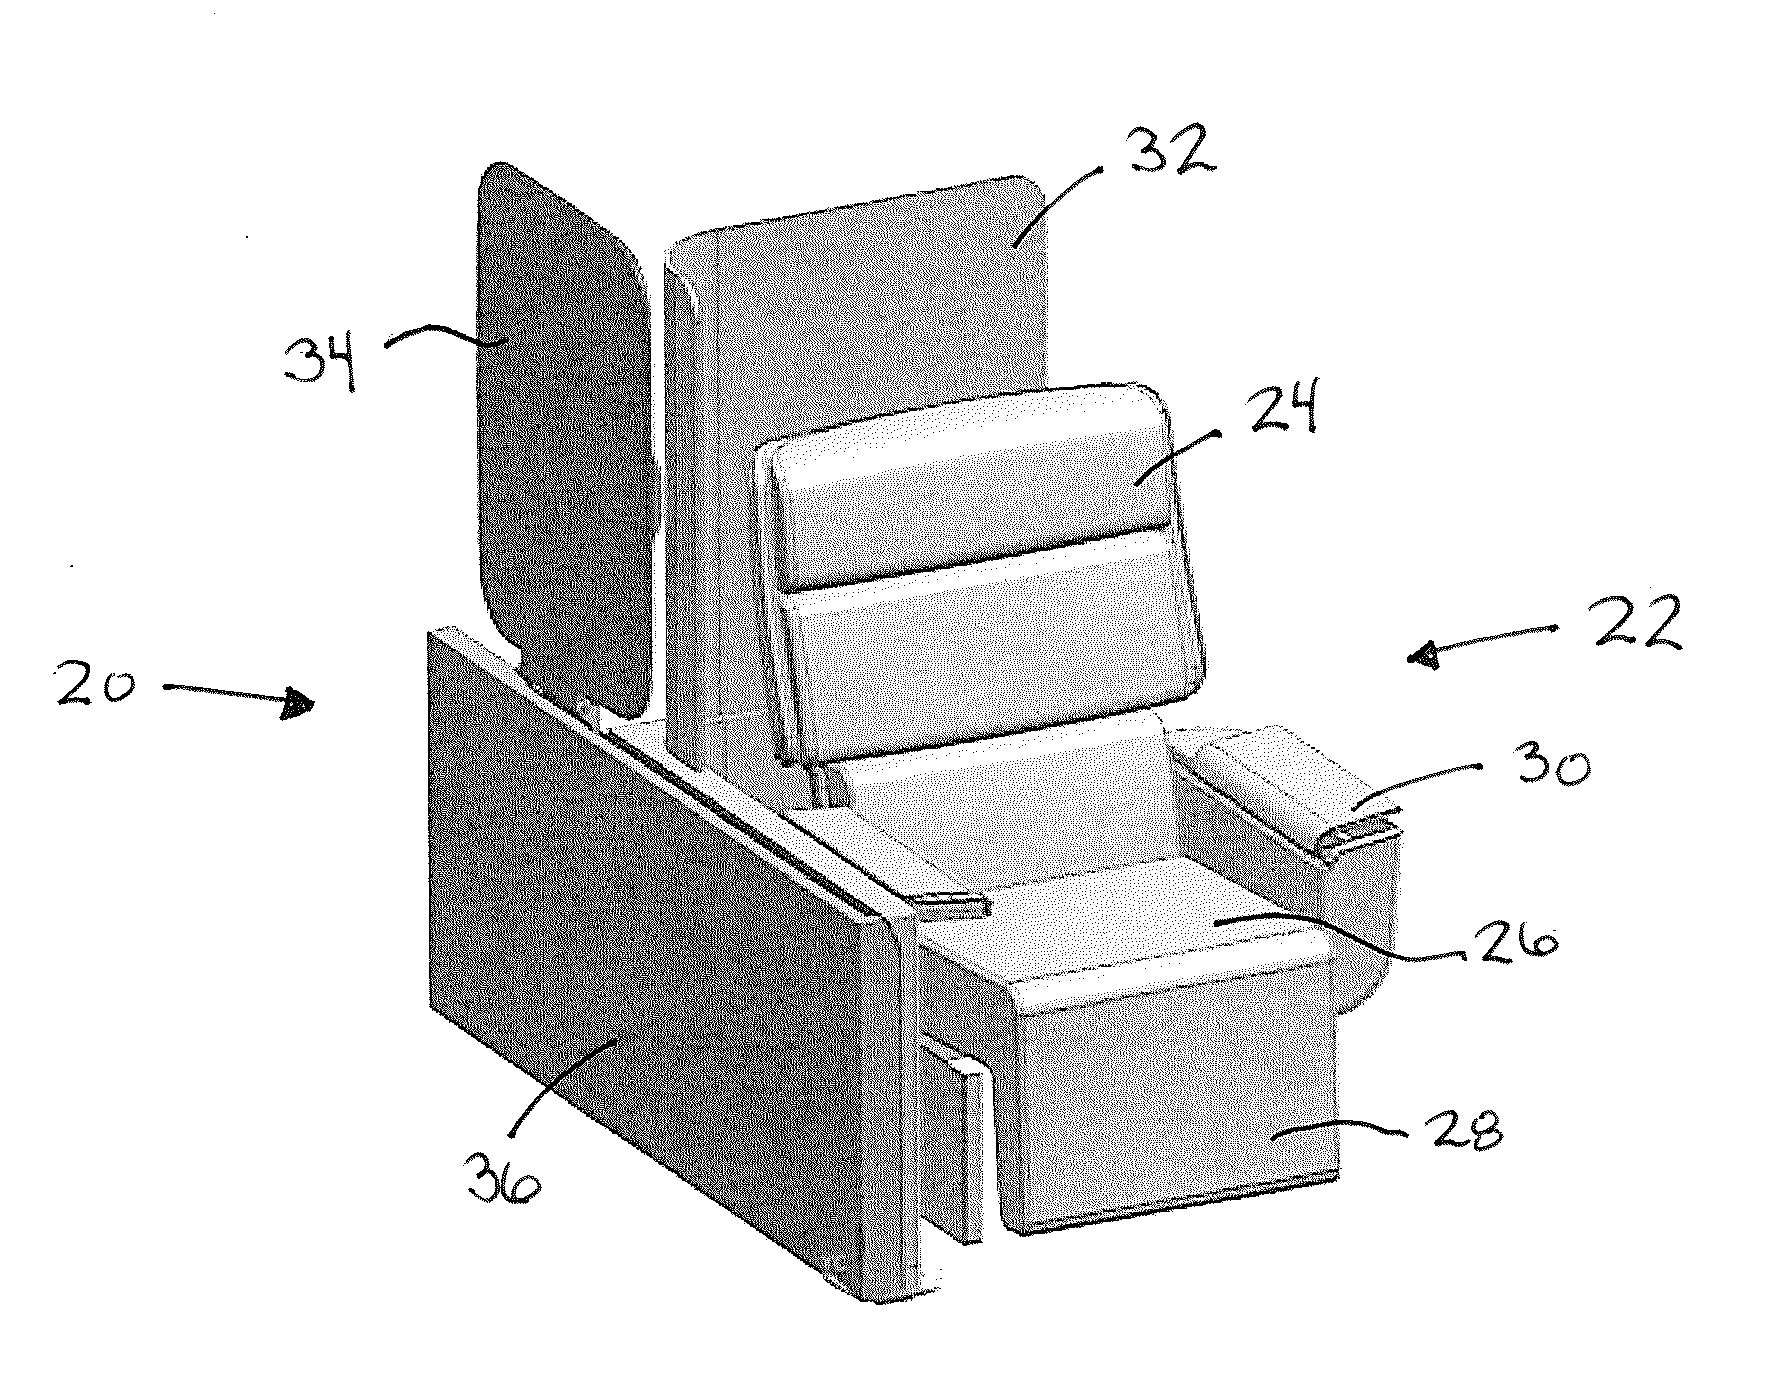 Vertically stowed tray table assembly with translational movement